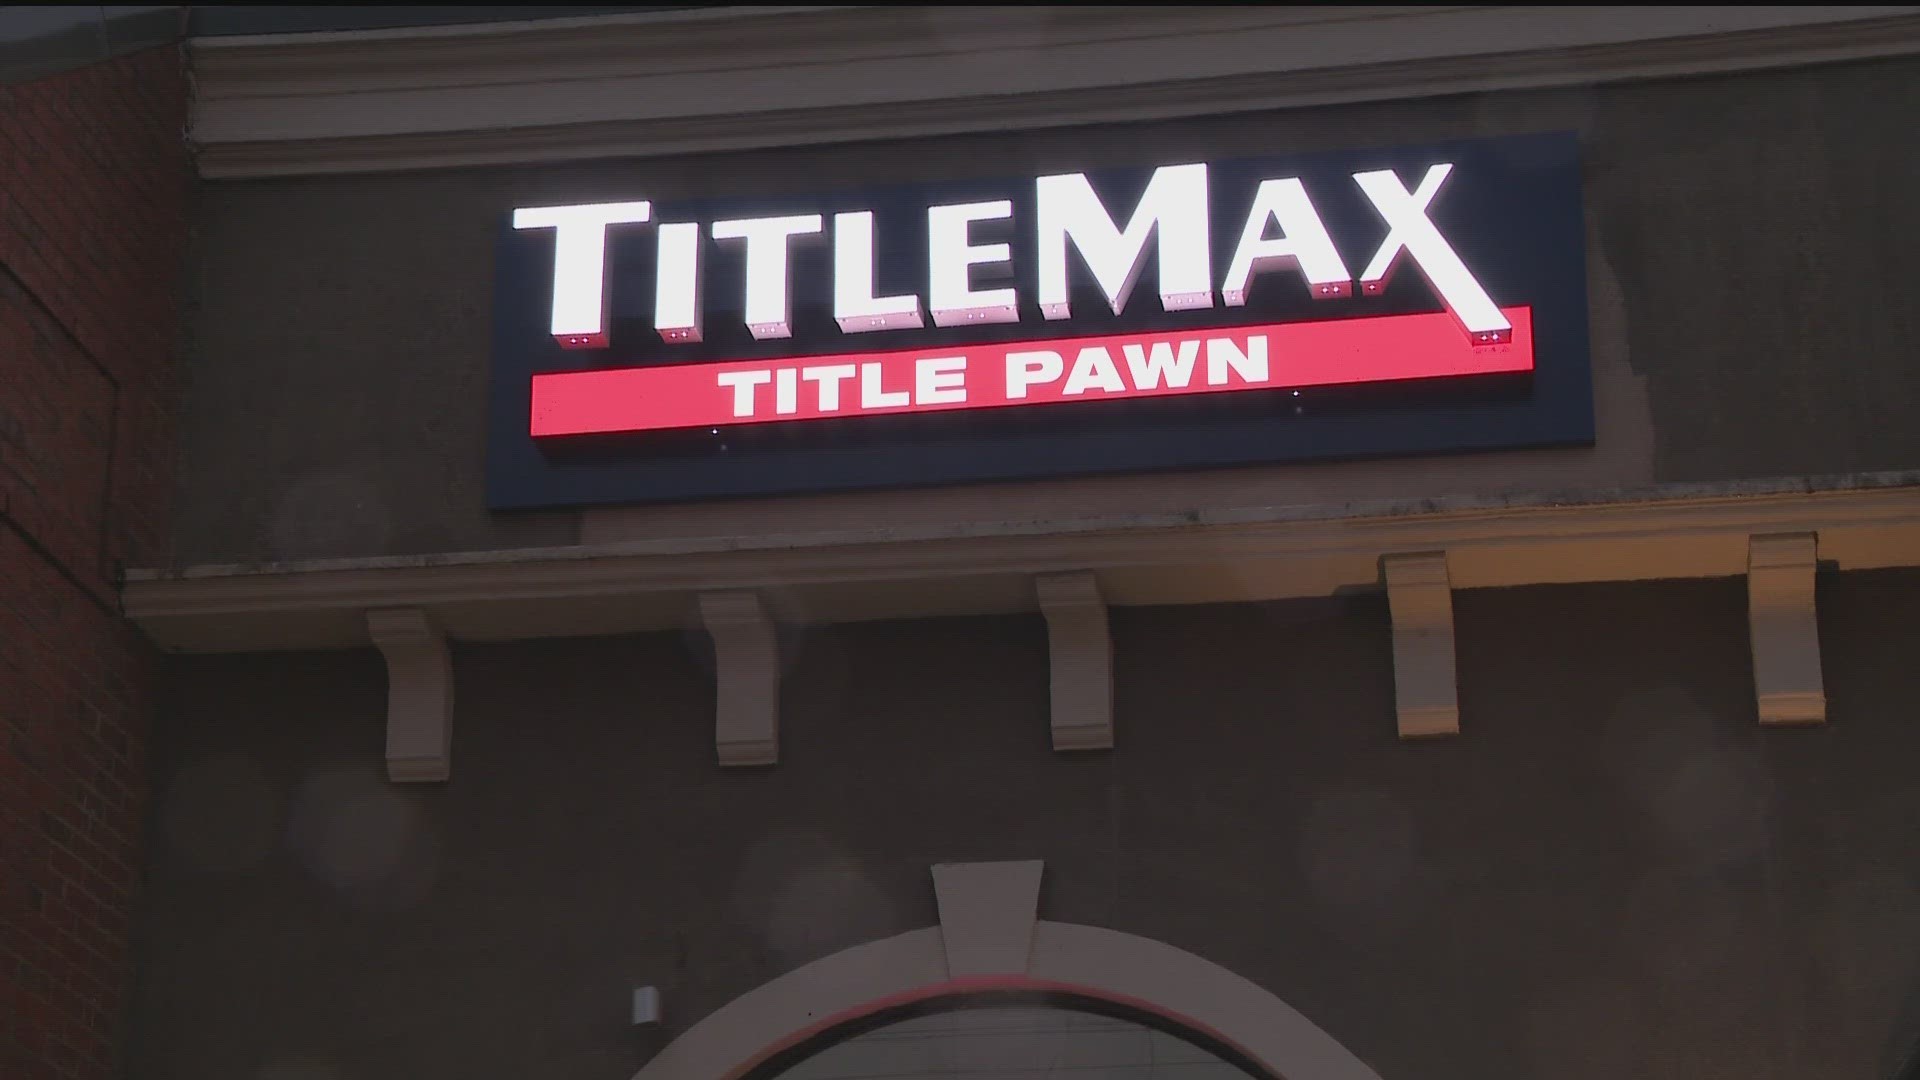 A Gwinnett County woman is warning of the risks that come from using title pawns.